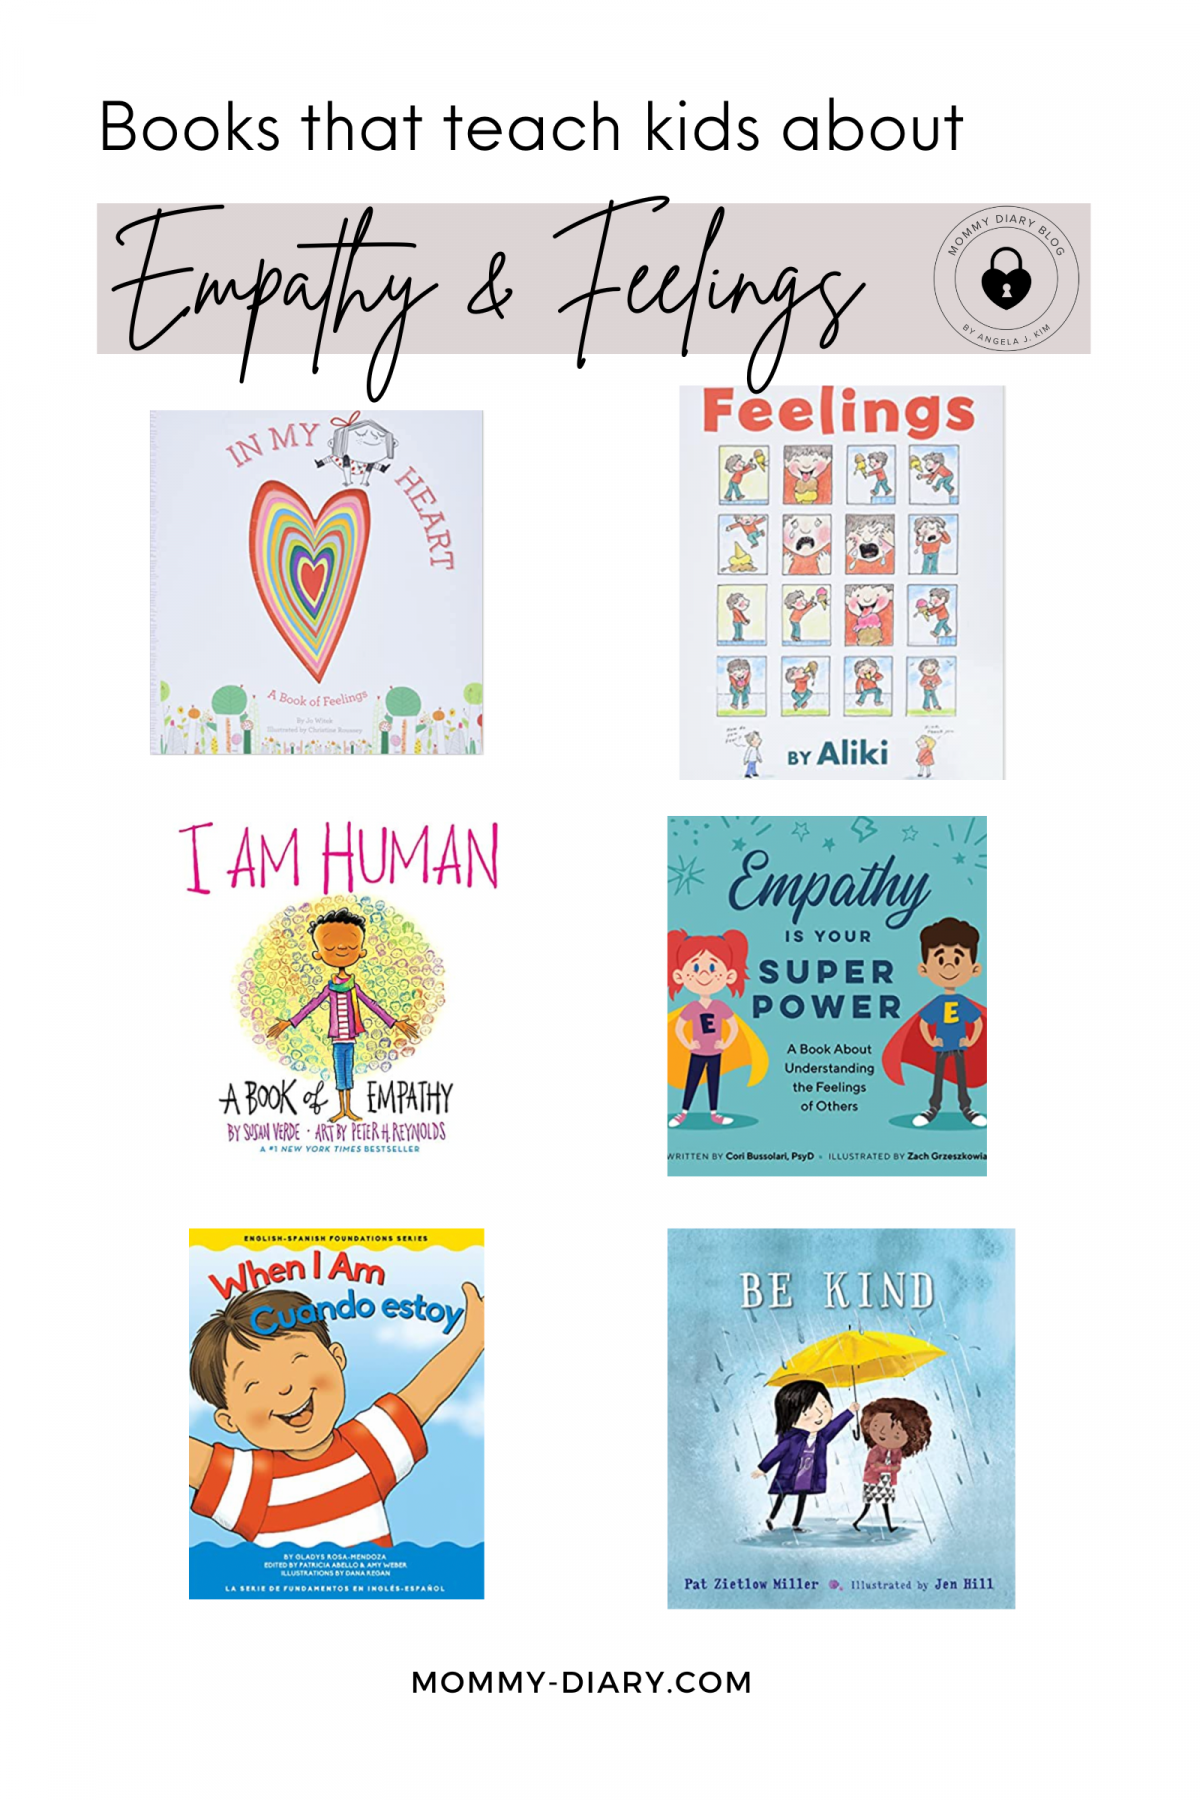 Books that teach kids about empathy & feelings